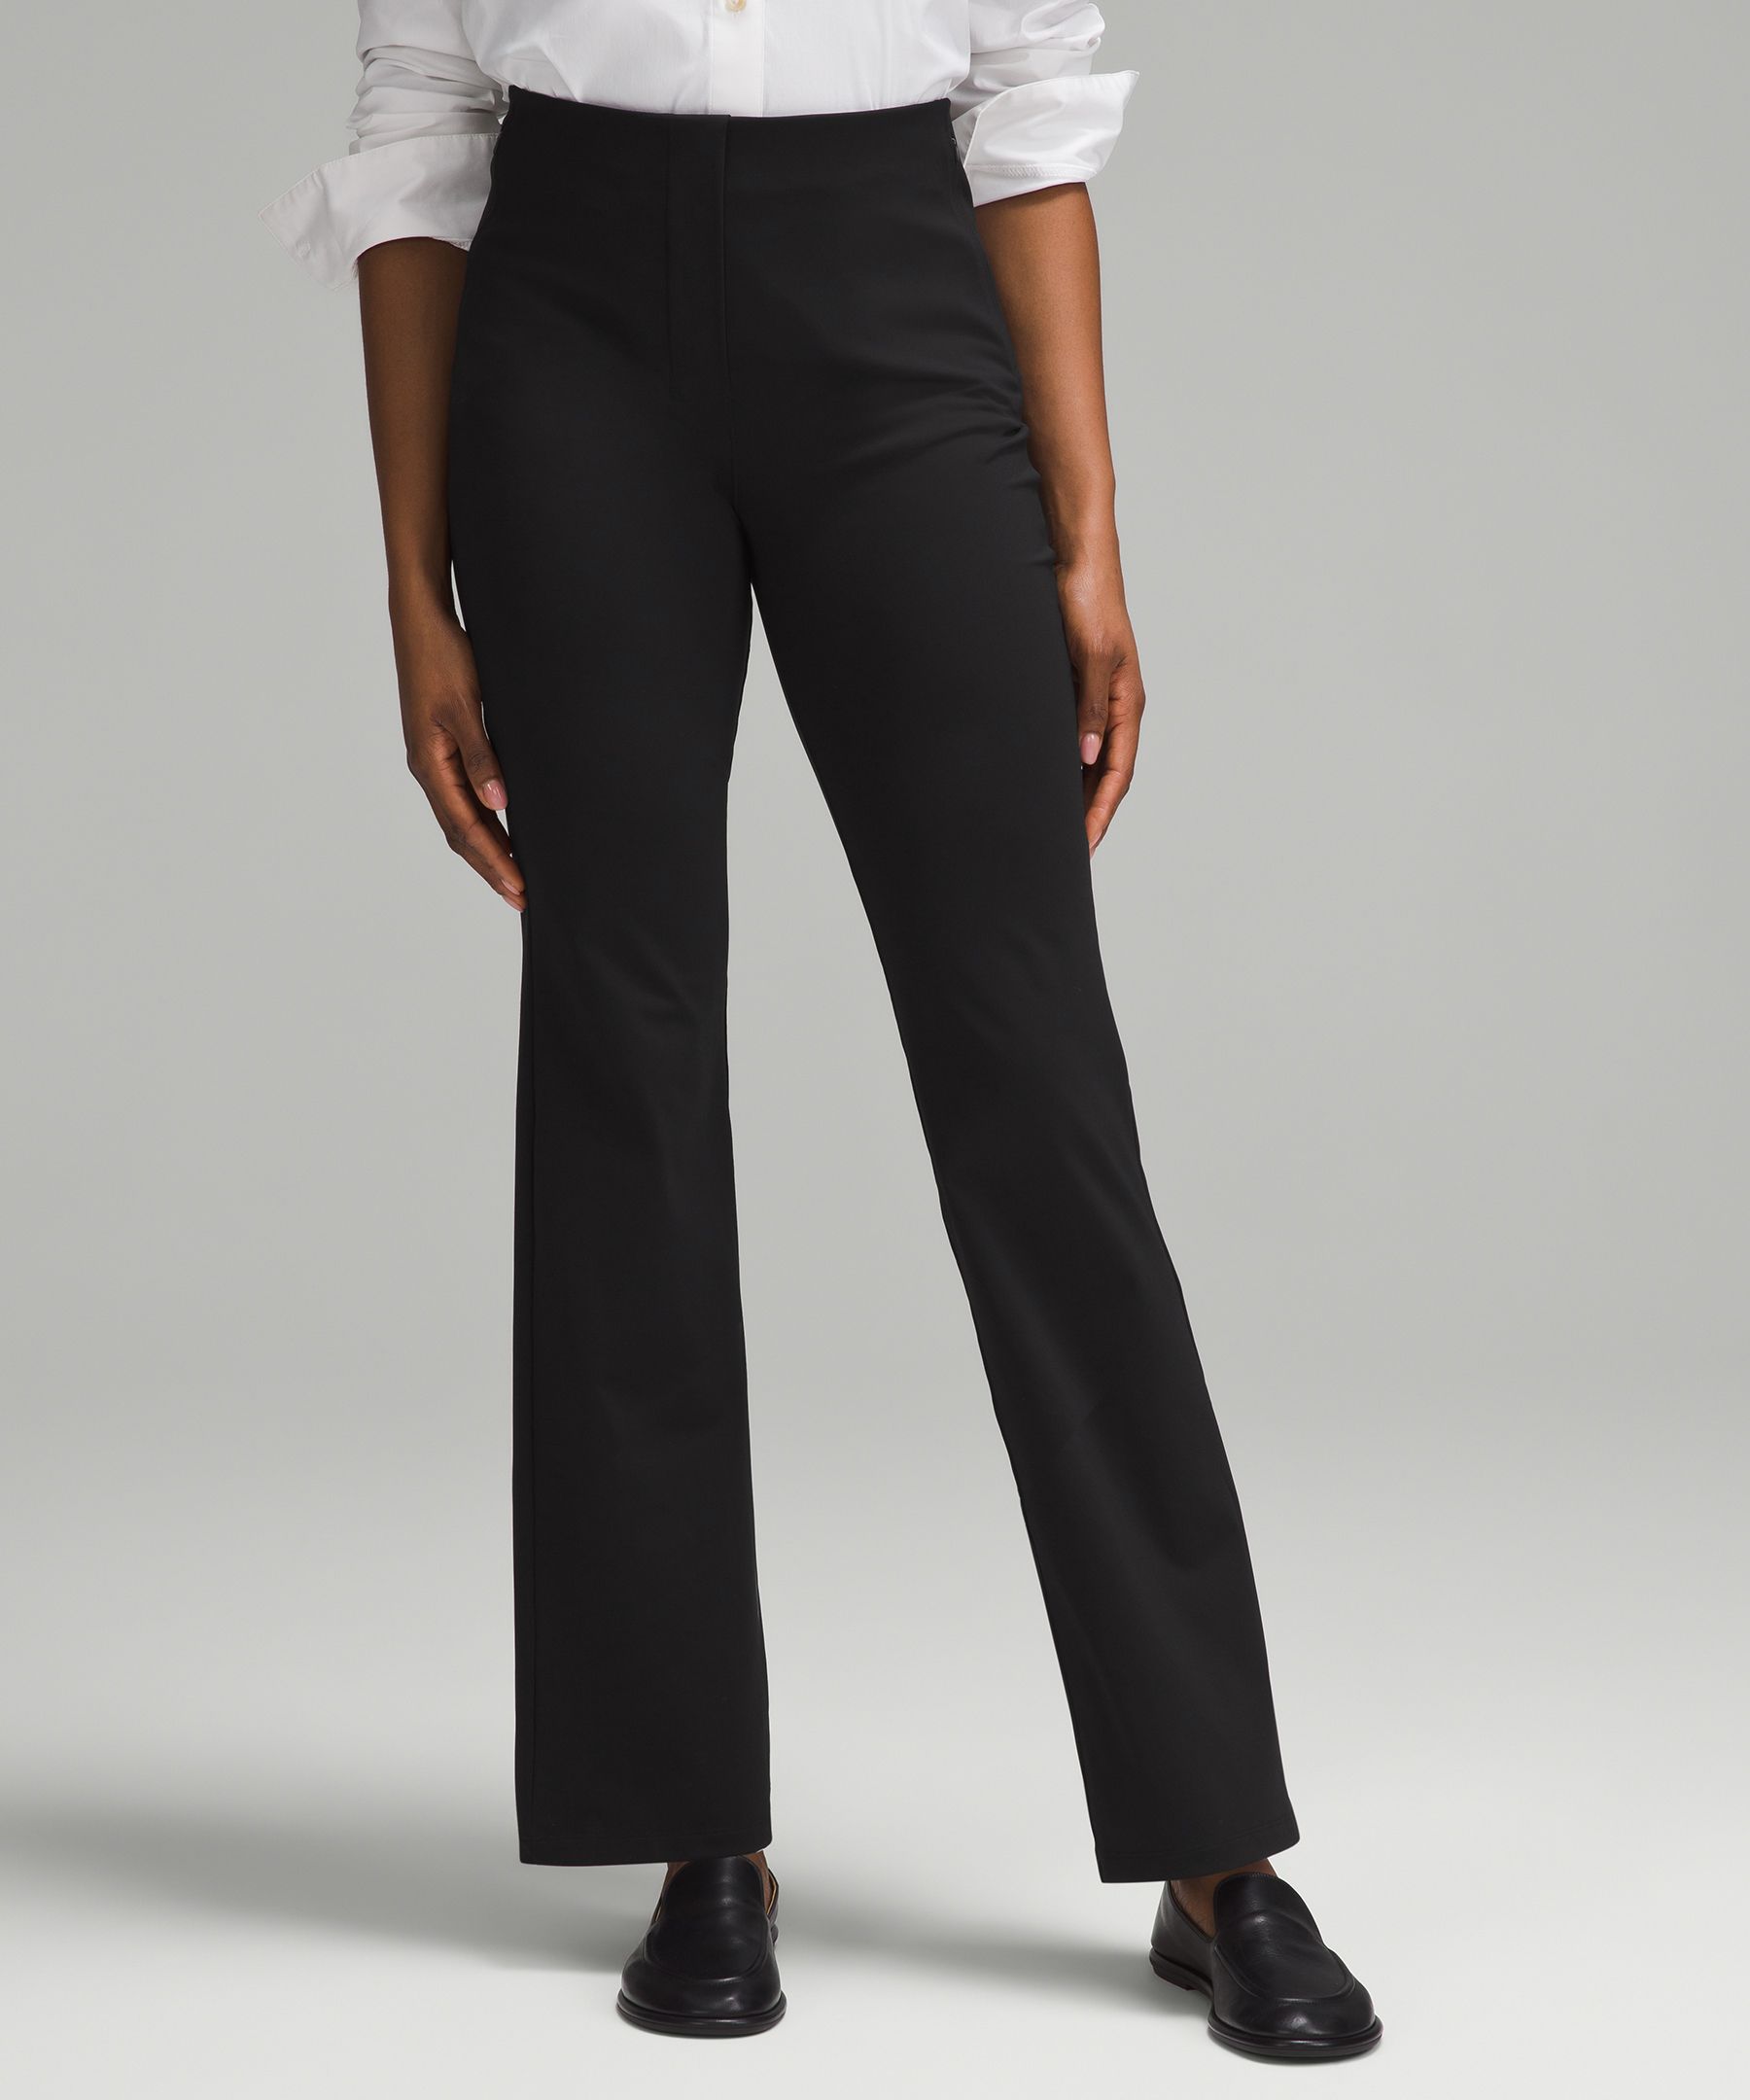 Lululemon Smooth Fit Pull-on High-rise Pants Tall